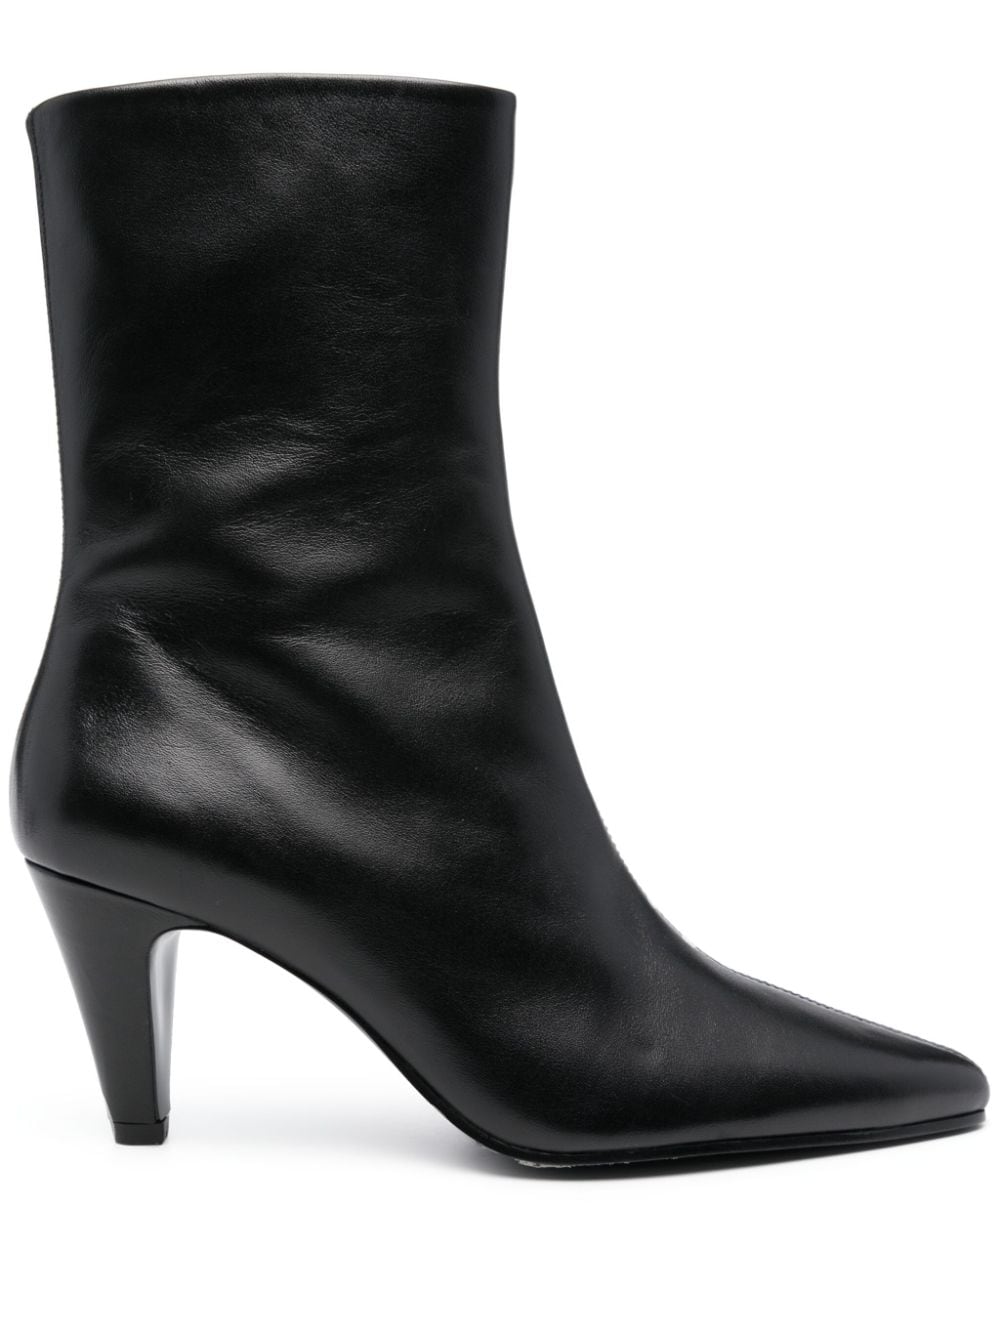 Claudie Pierlot Ankle-high 75mm Boots In Black